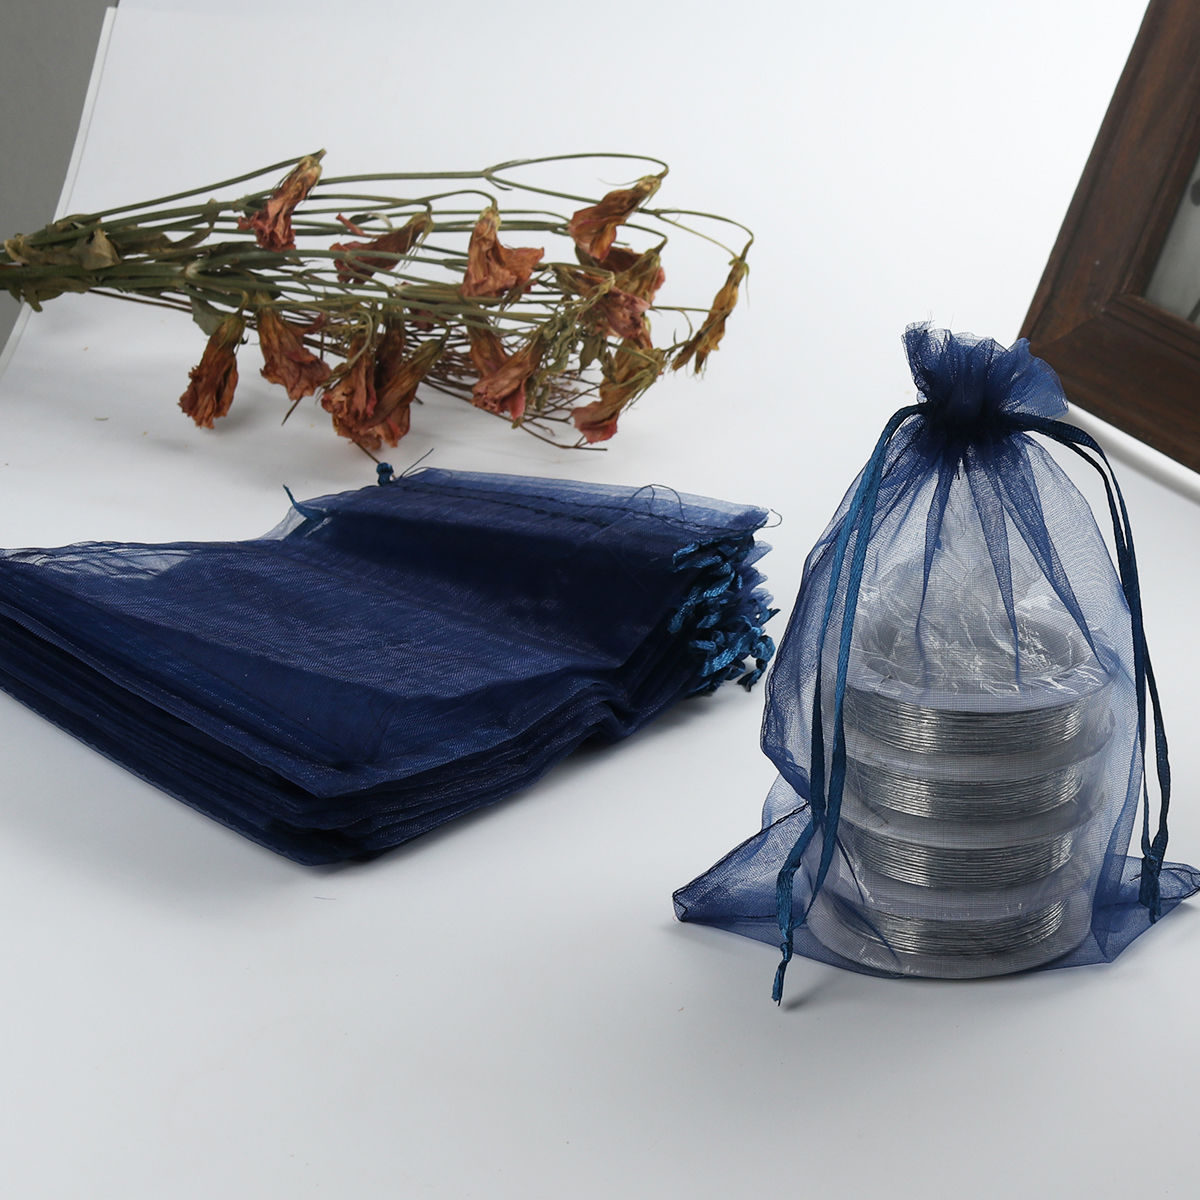 Picture of Wedding Gift Organza Jewelry Bags Drawstring Rectangle Navy Blue (Usable Space: 13.5x10.5cm) 16cm x 11cm, 20 PCs